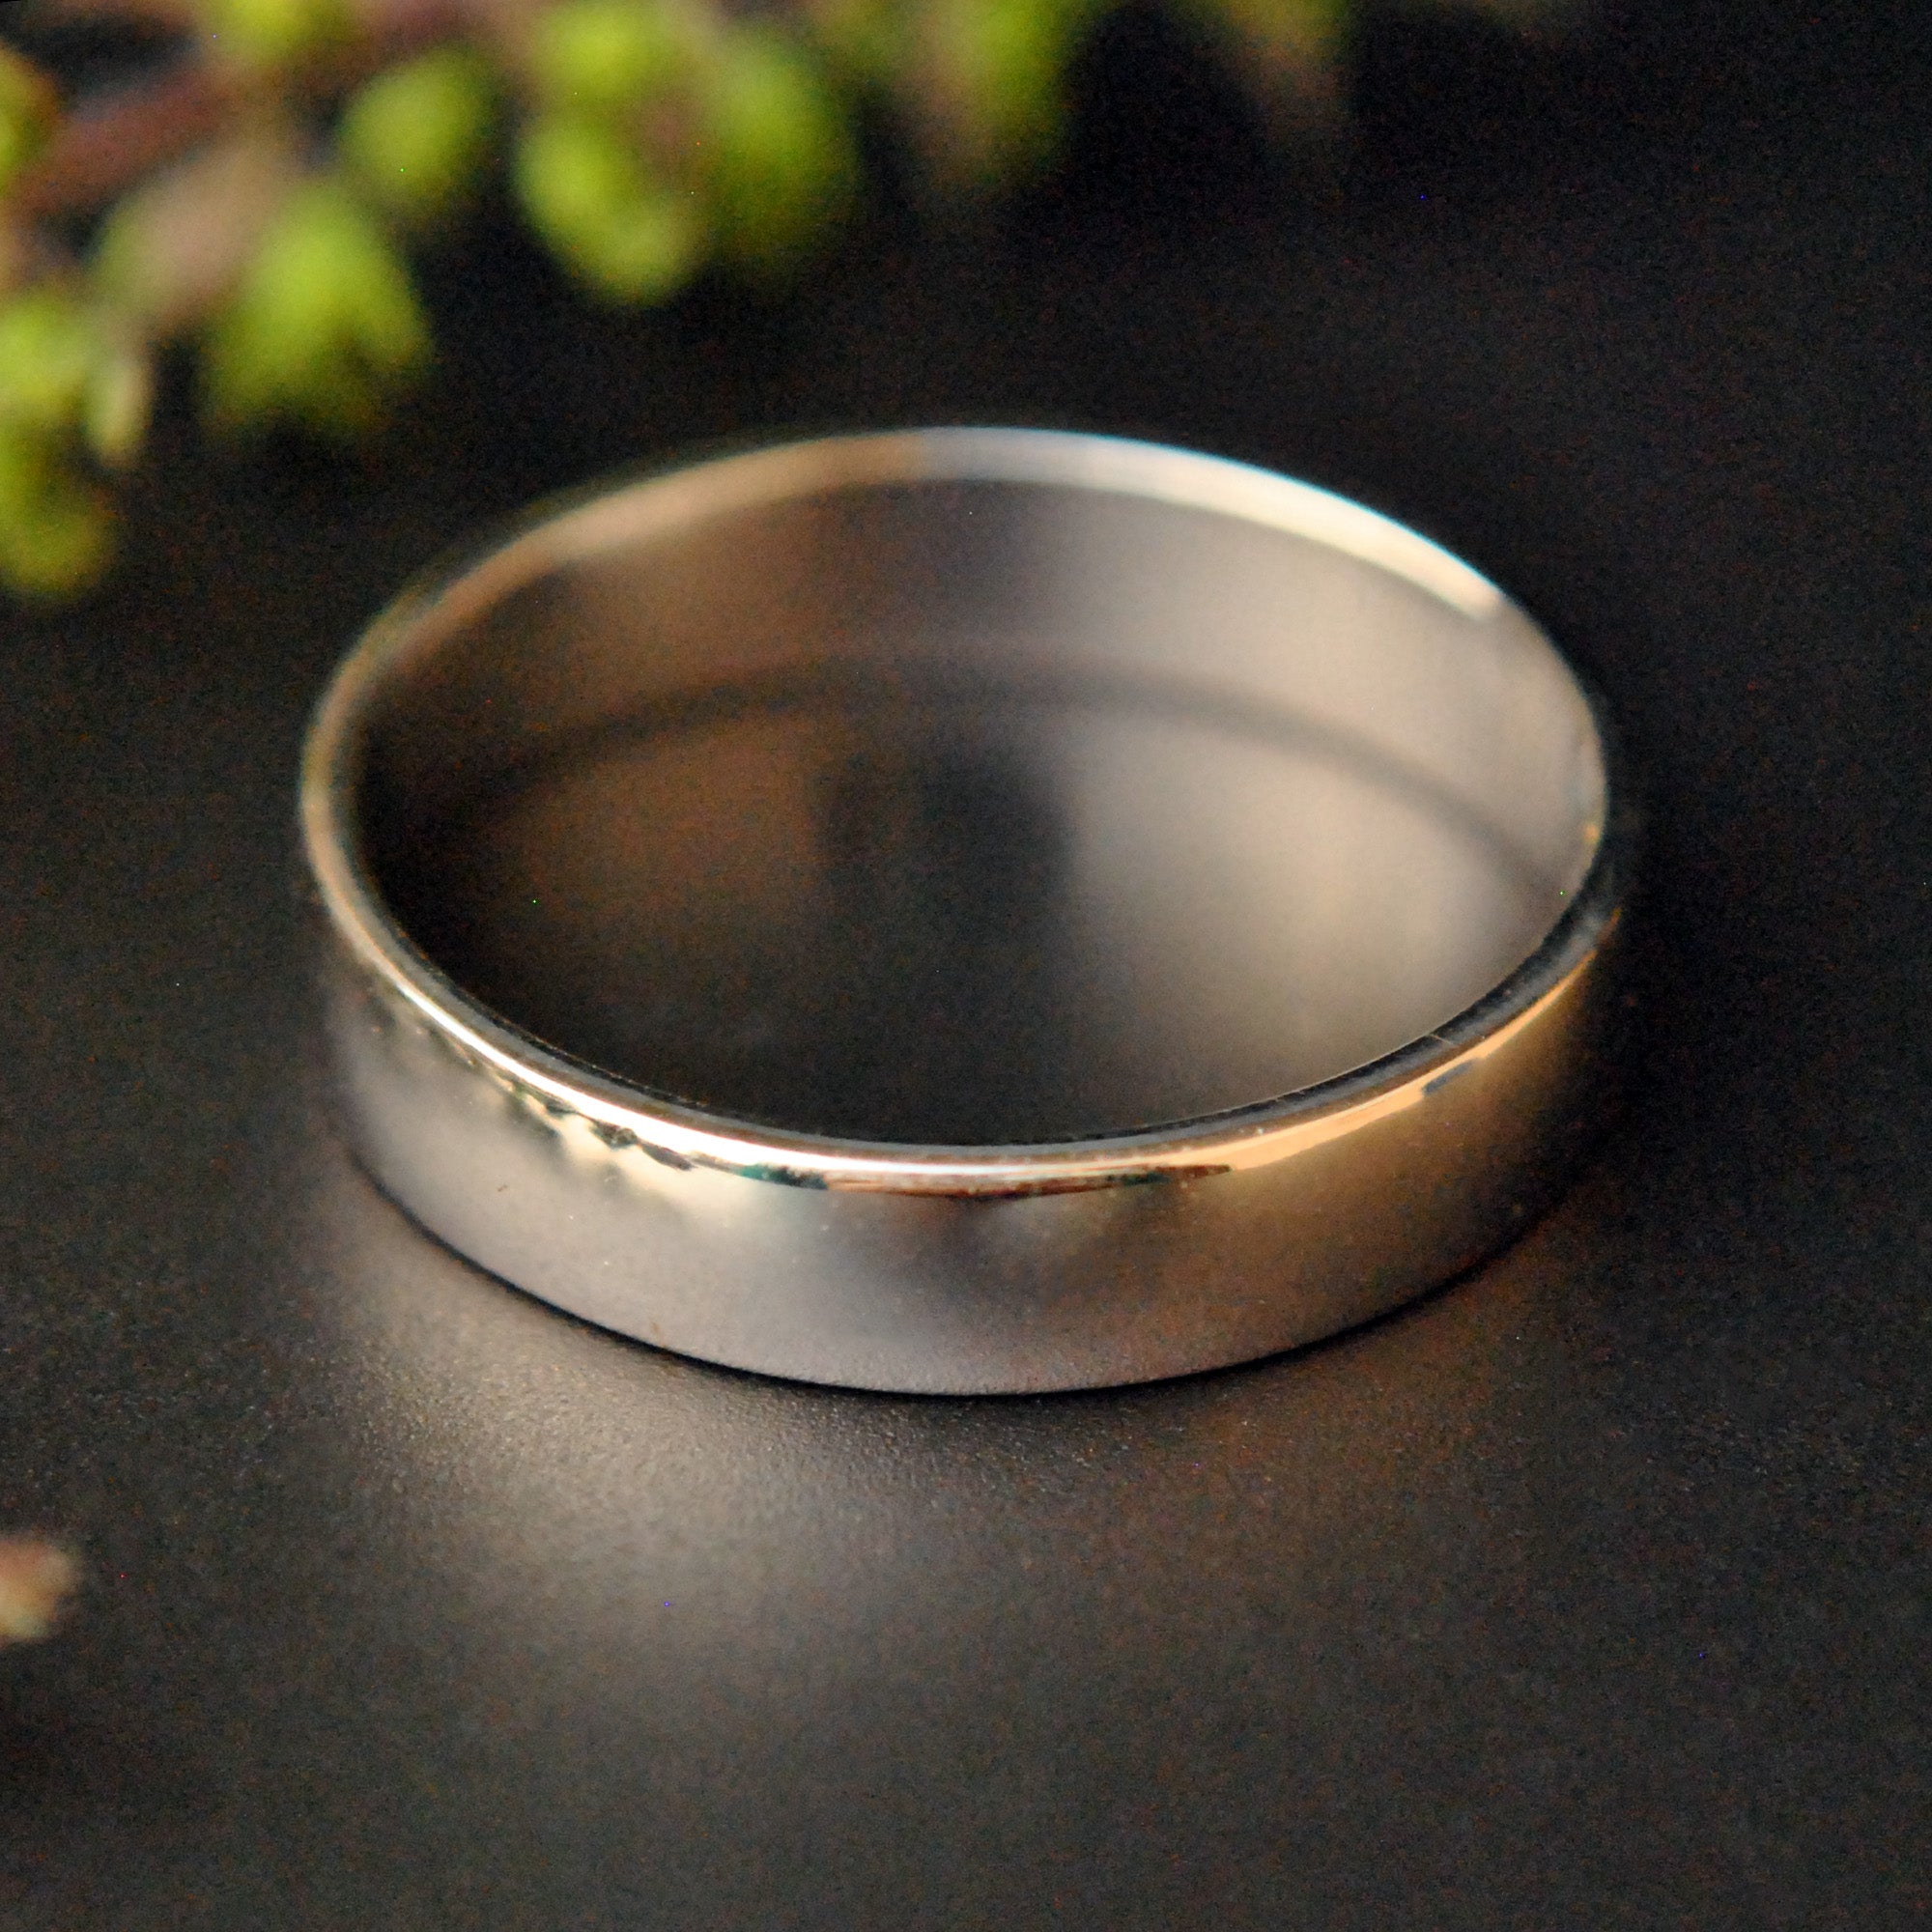 4mm Flat Fit Solid Gold Wedding Unisex Band, Comfort Fit Band with Slight Dome